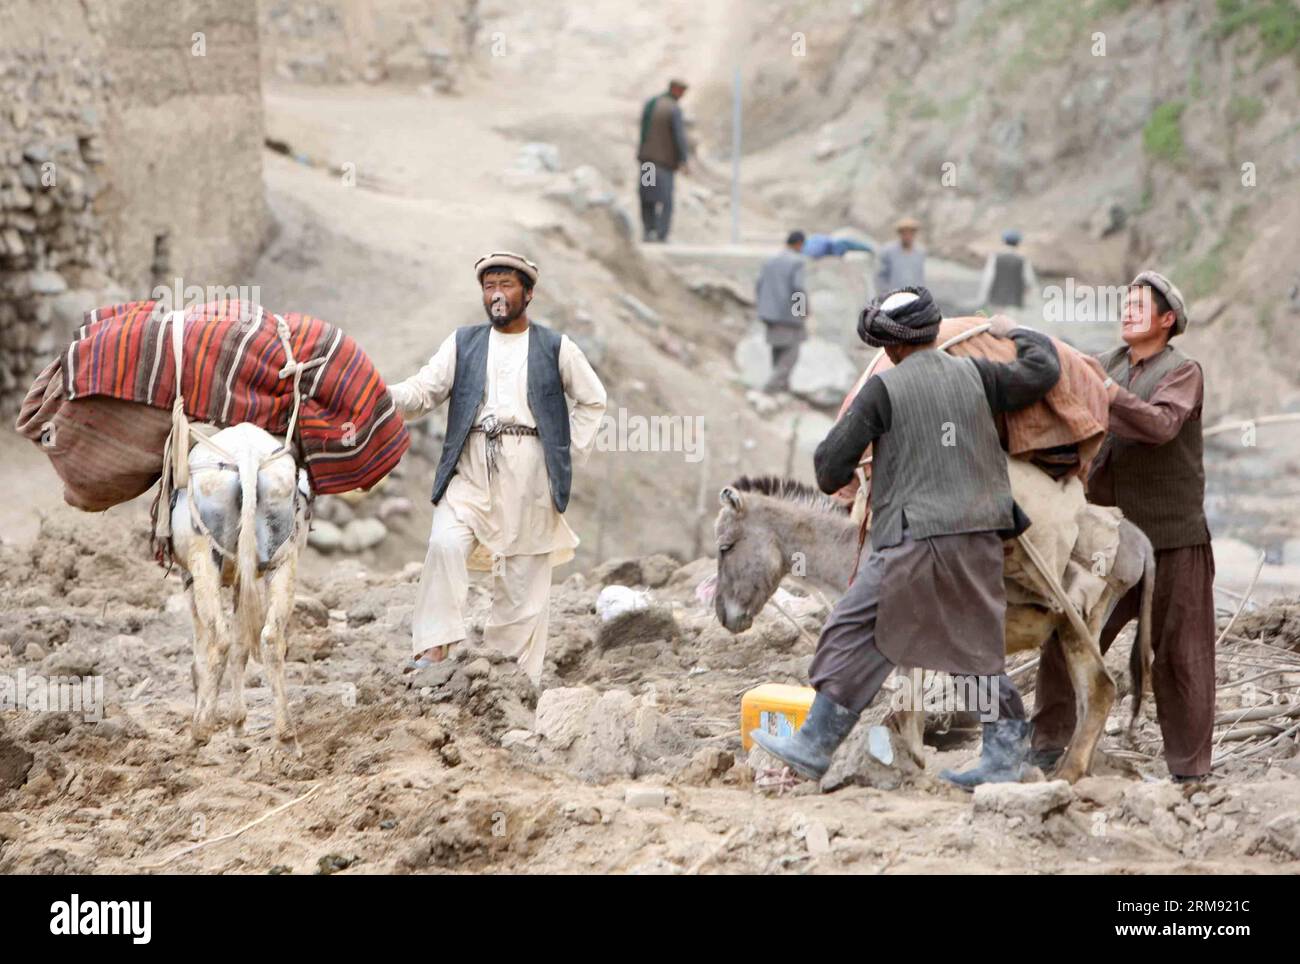 (140504) -- BADAKHSHAN,  (Xinhua) -- Afghan men and their donkeys are seen at the landslide site in Badakhshan, Afghanistan, May 3, 2014. A massive landslide hit a village in northern Afghan Badakhshan province on Friday, causing heavy casualties, but the exact number of deaths and injuries remained unknown Saturday as officials here released contradictory numbers. (Xinhua/Ahmad Massoud) AFGHNAISTAN-BADAKHSHAN-LANDSLIDE PUBLICATIONxNOTxINxCHN   Badakhshan XINHUA Afghan Men and their Donkeys are Lakes AT The landslide Site in Badakhshan Afghanistan May 3 2014 a Massive landslide Hit a Village i Stock Photo